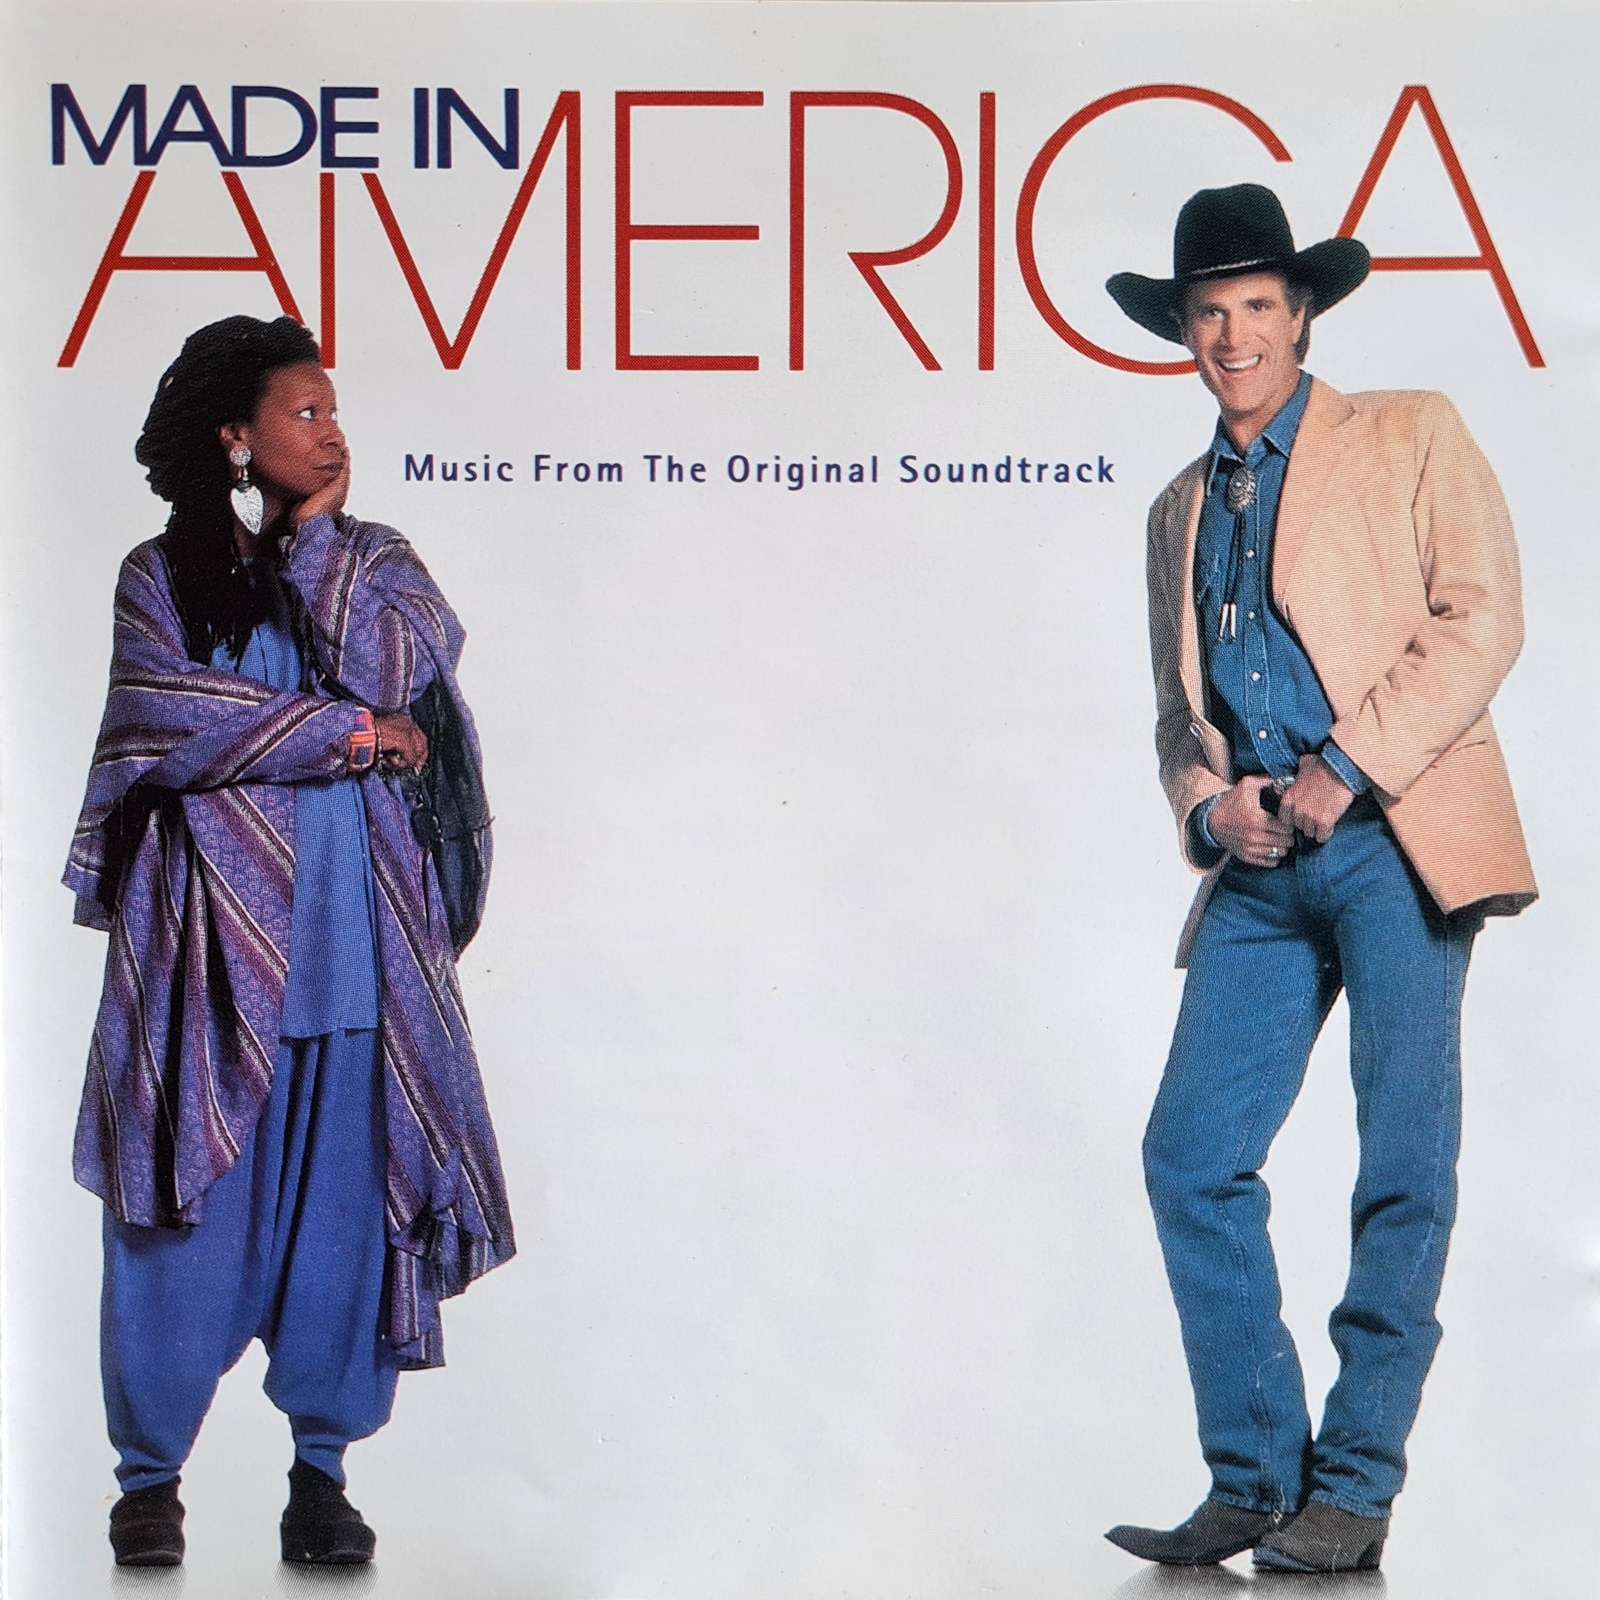 Made in America - Music from the Original Soundtrack (CD)